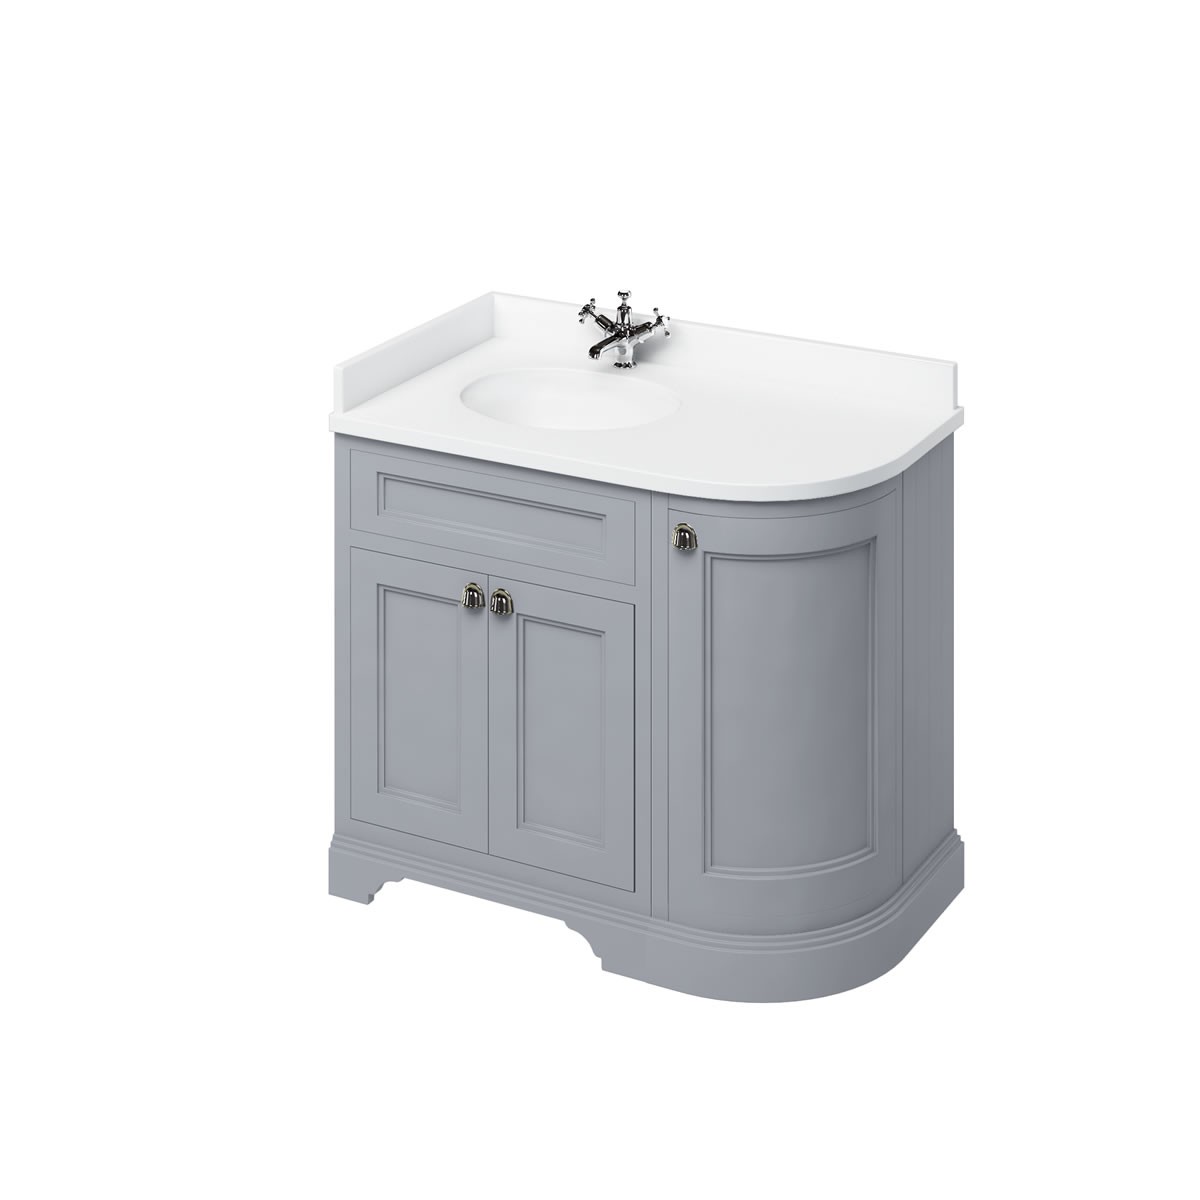 Burlington BW98L Minerva 1000mm Curved Worktop with Left Hand Vanity Basin White (Furniture & Brassware NOT Included)